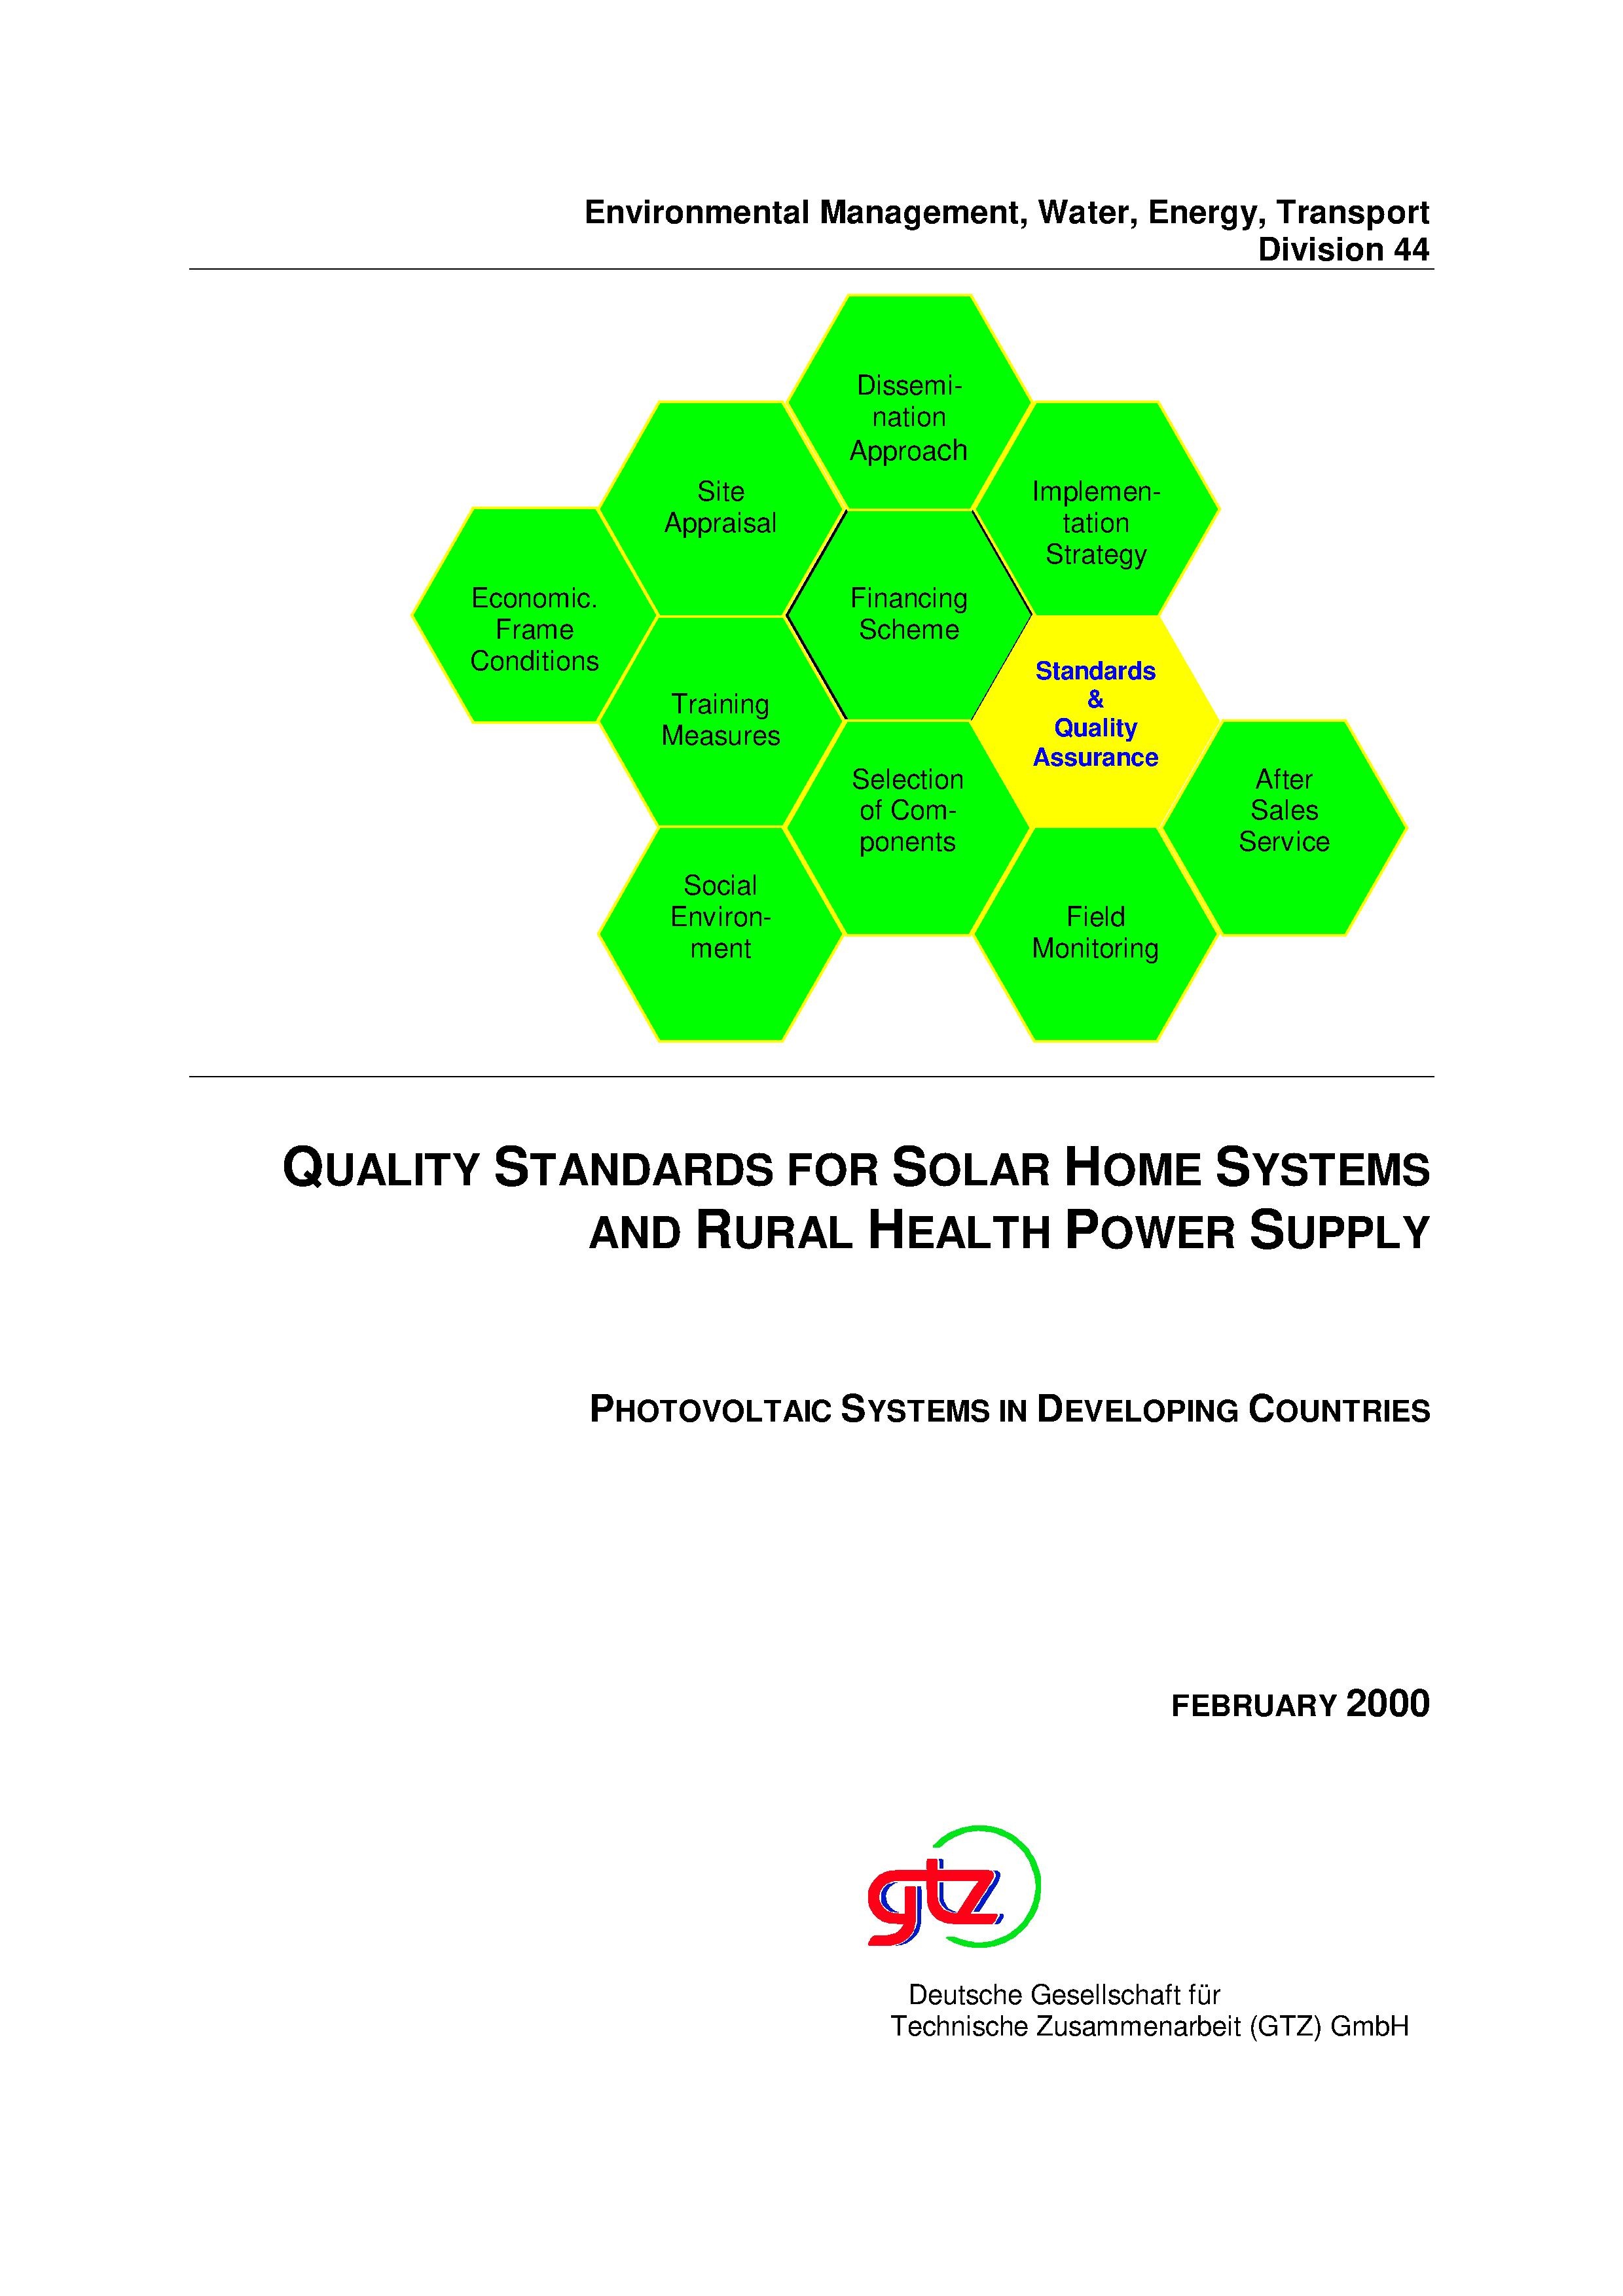 Quality Standards for Solar Home Systems and Rural Health Power Supply